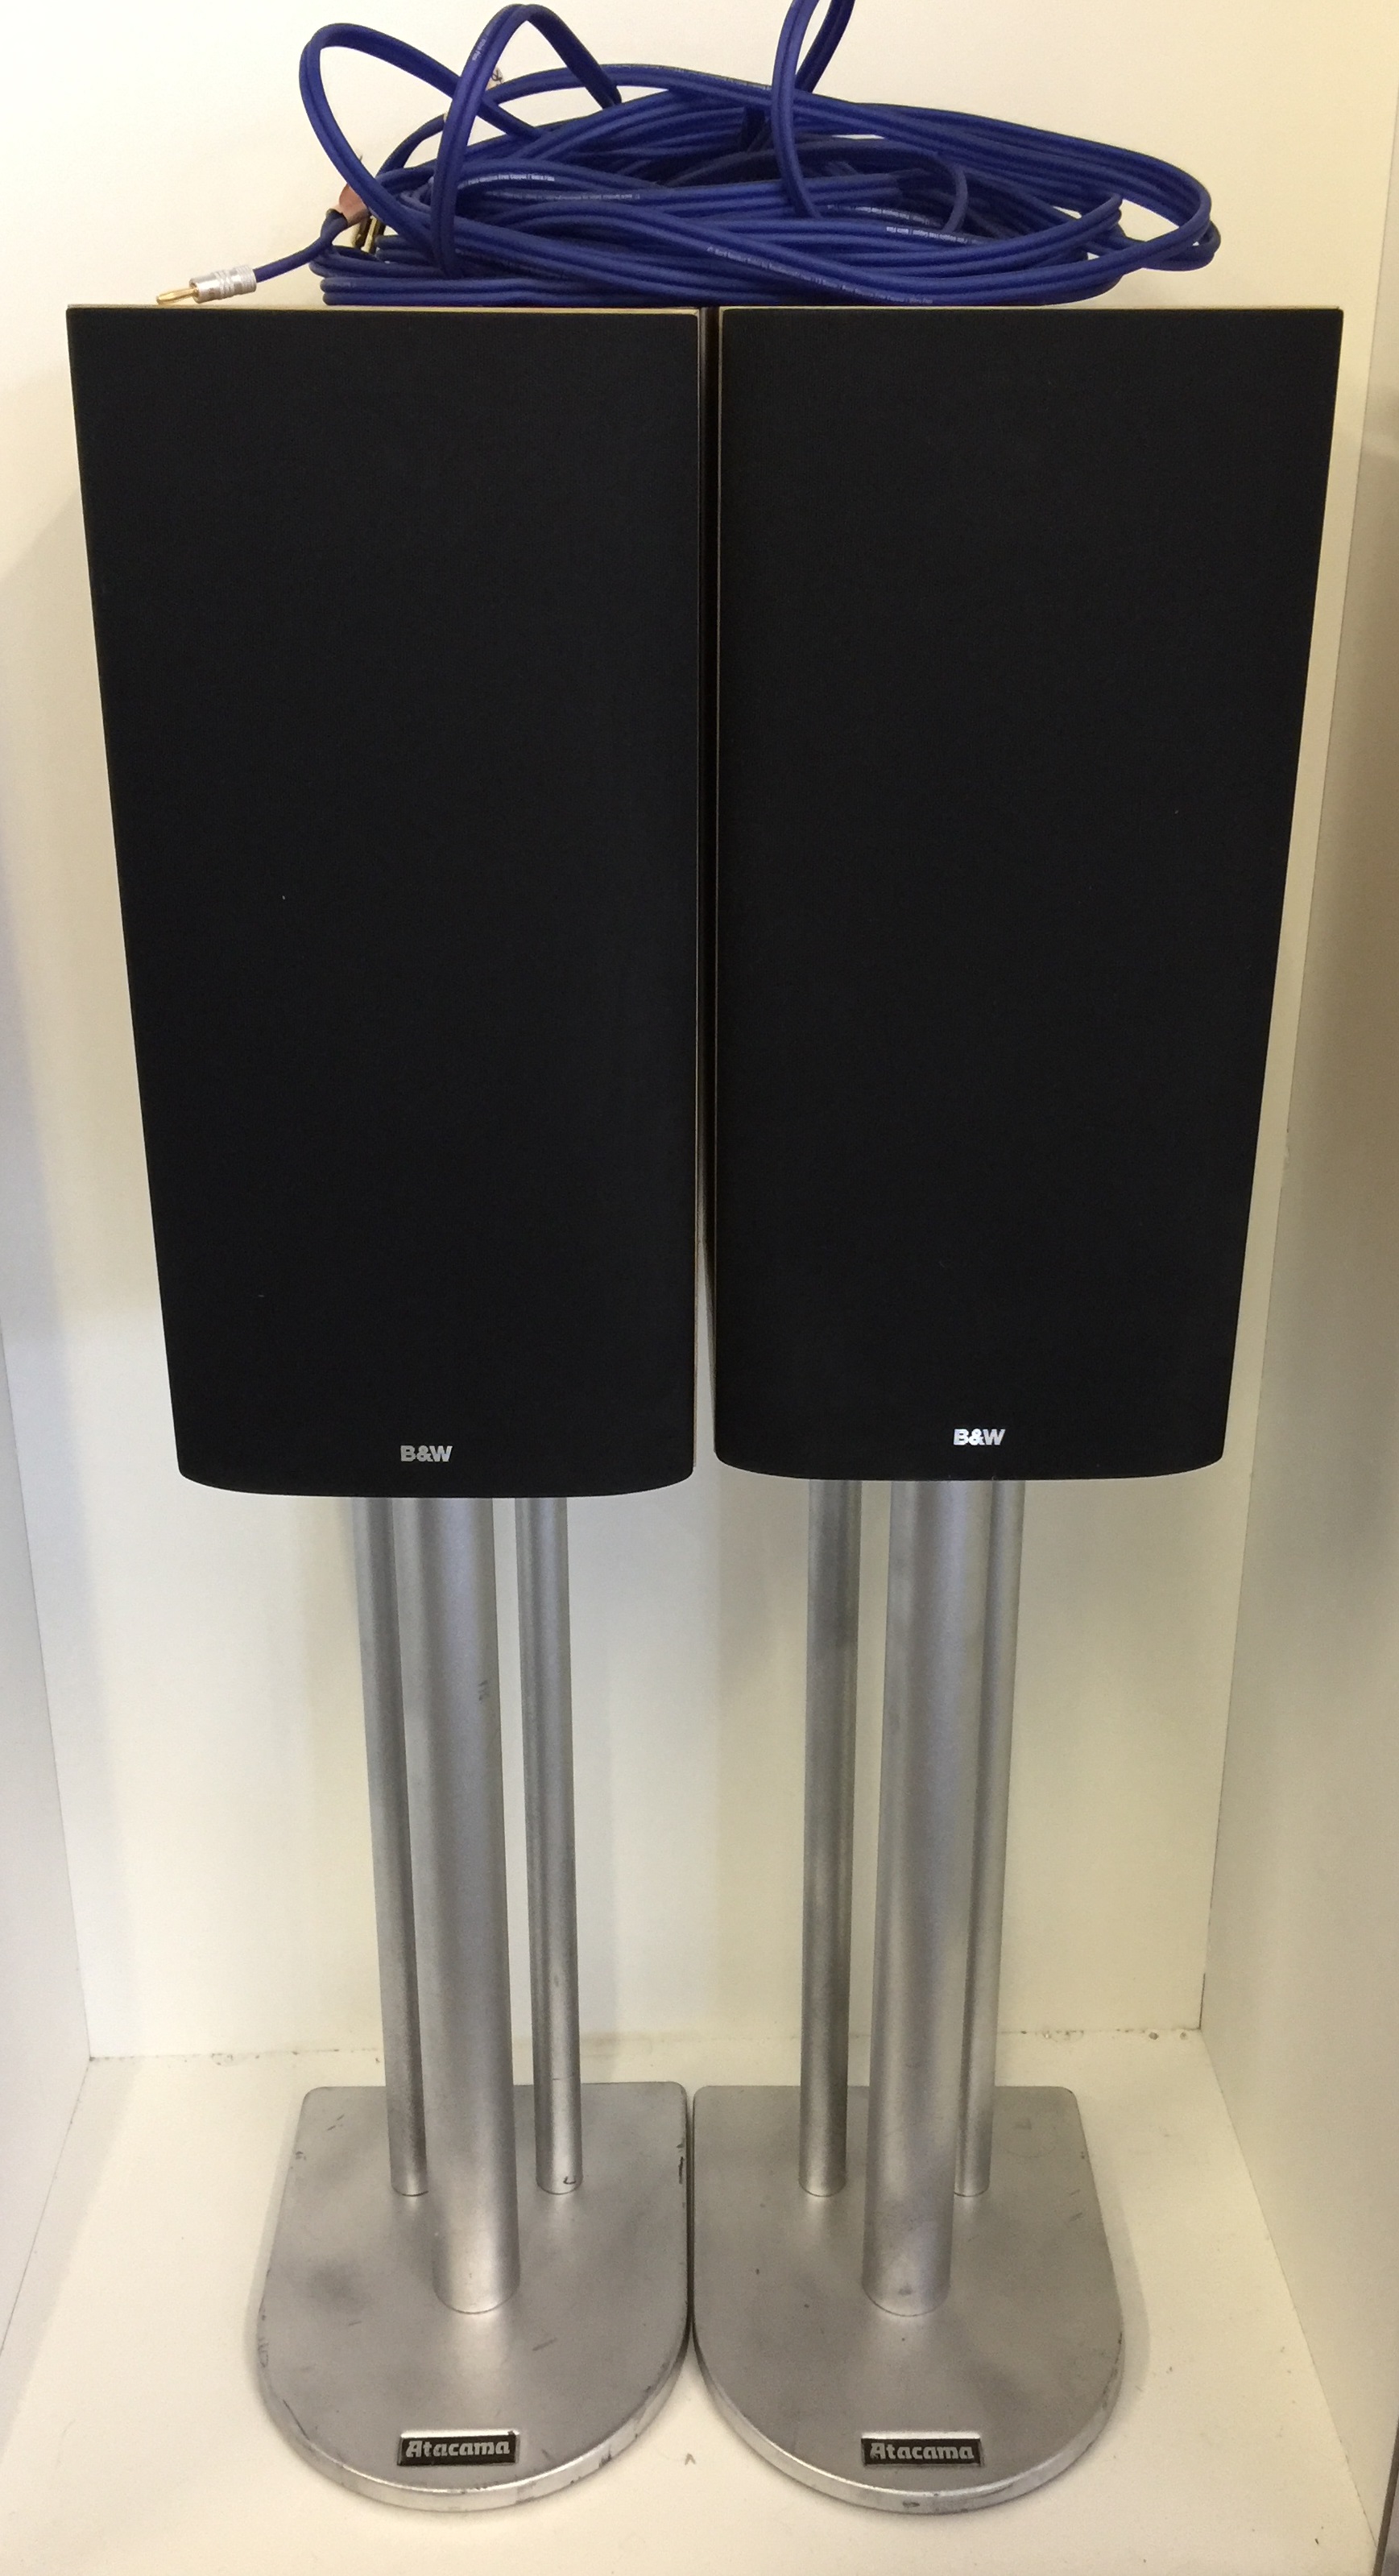 HIFI AUDIO - a pair of 2 B&W DM602 S3 Stereo speakers with a pair of Atacama speaker stands.